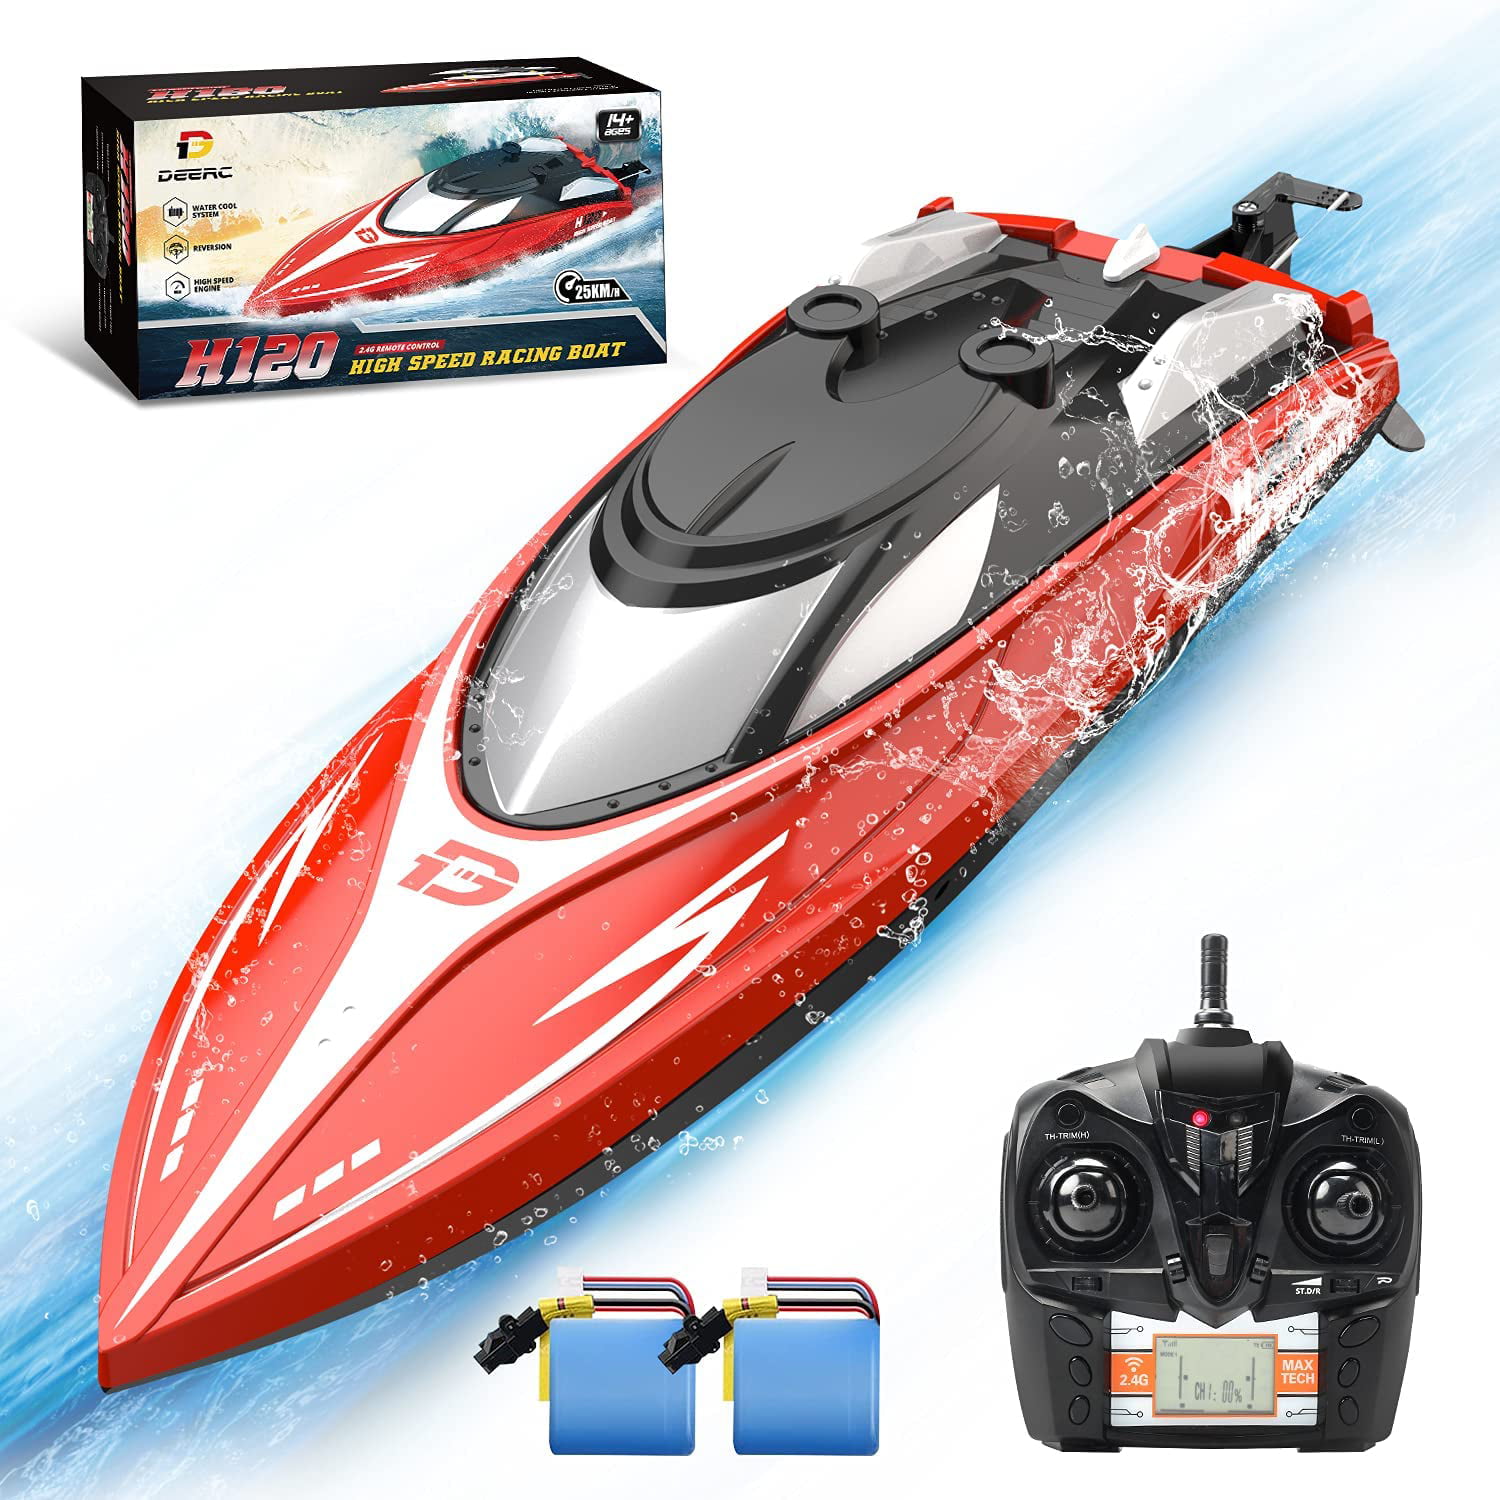 SkyCo H102 Rc Boat 2.4GHz High Speed Remote Control Boats for Kids and Adults. 